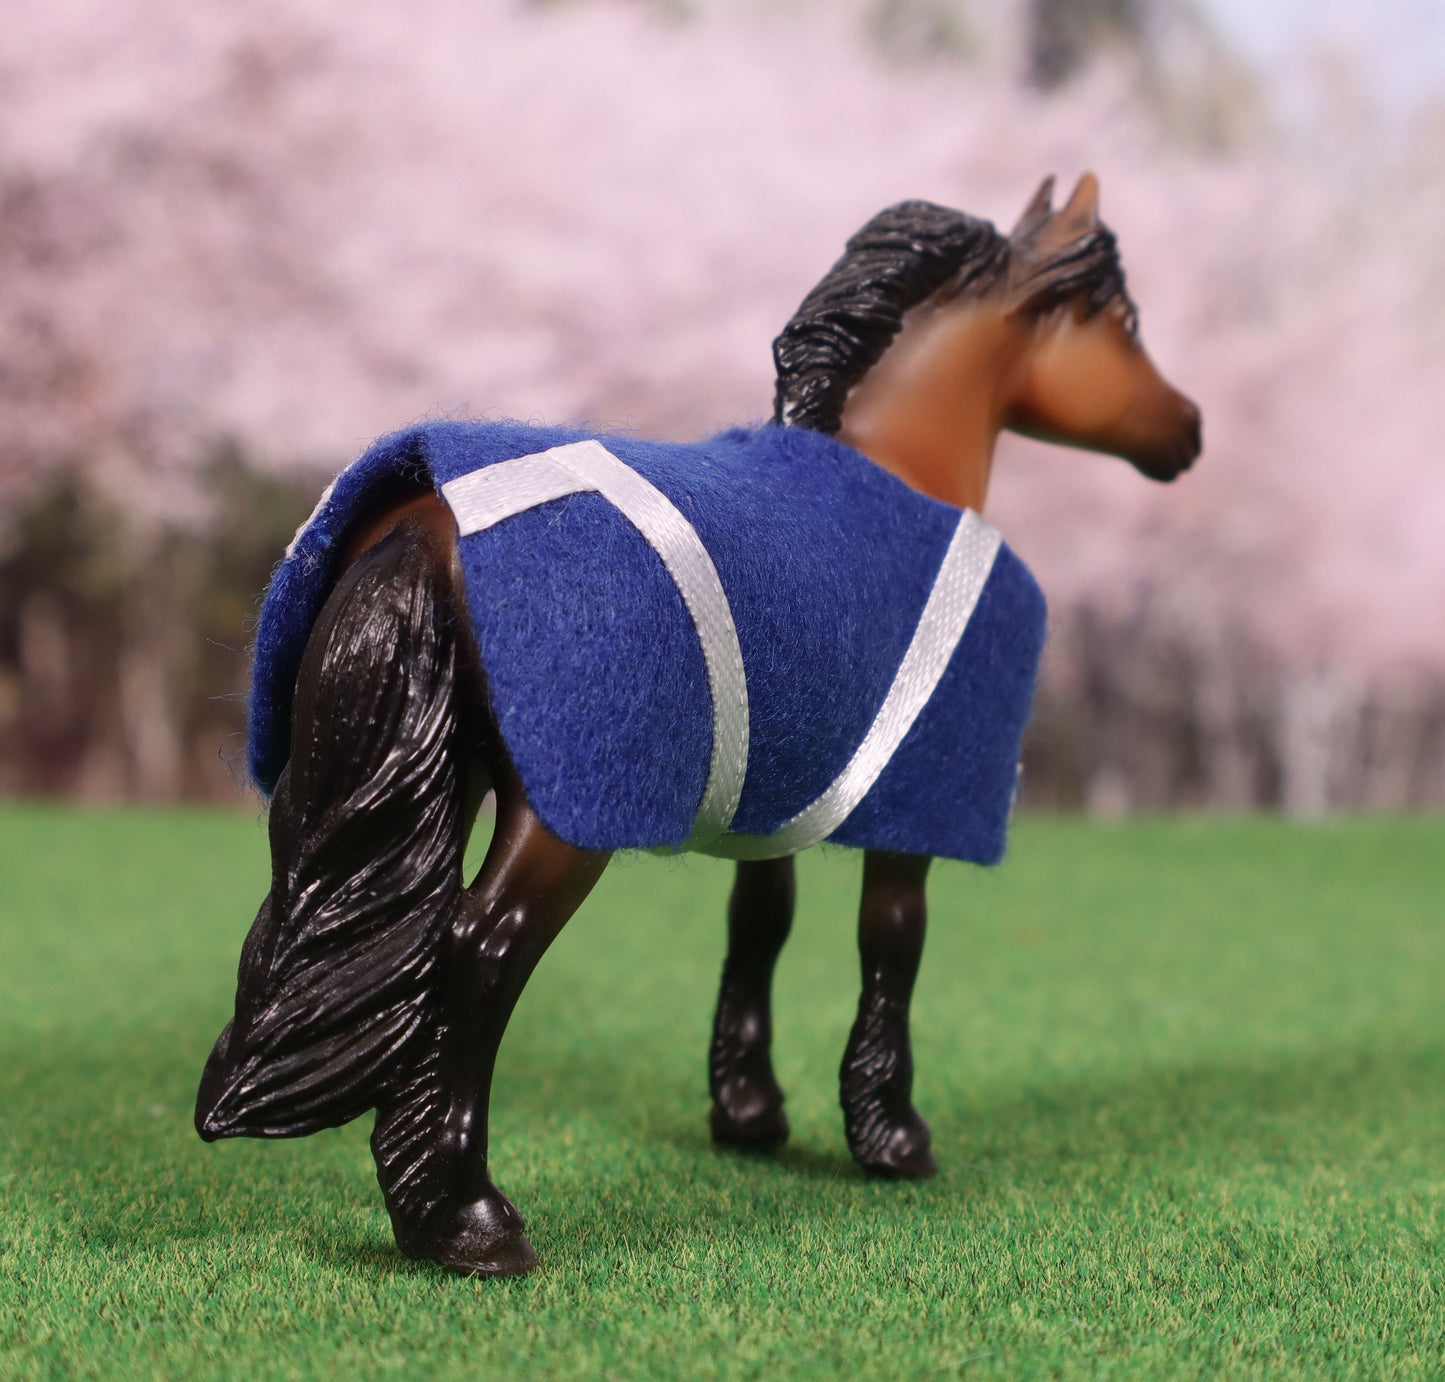 Blue and White Stable Blanket for Breyer Stablemates Model Horses - Made for G3 Pony Mold